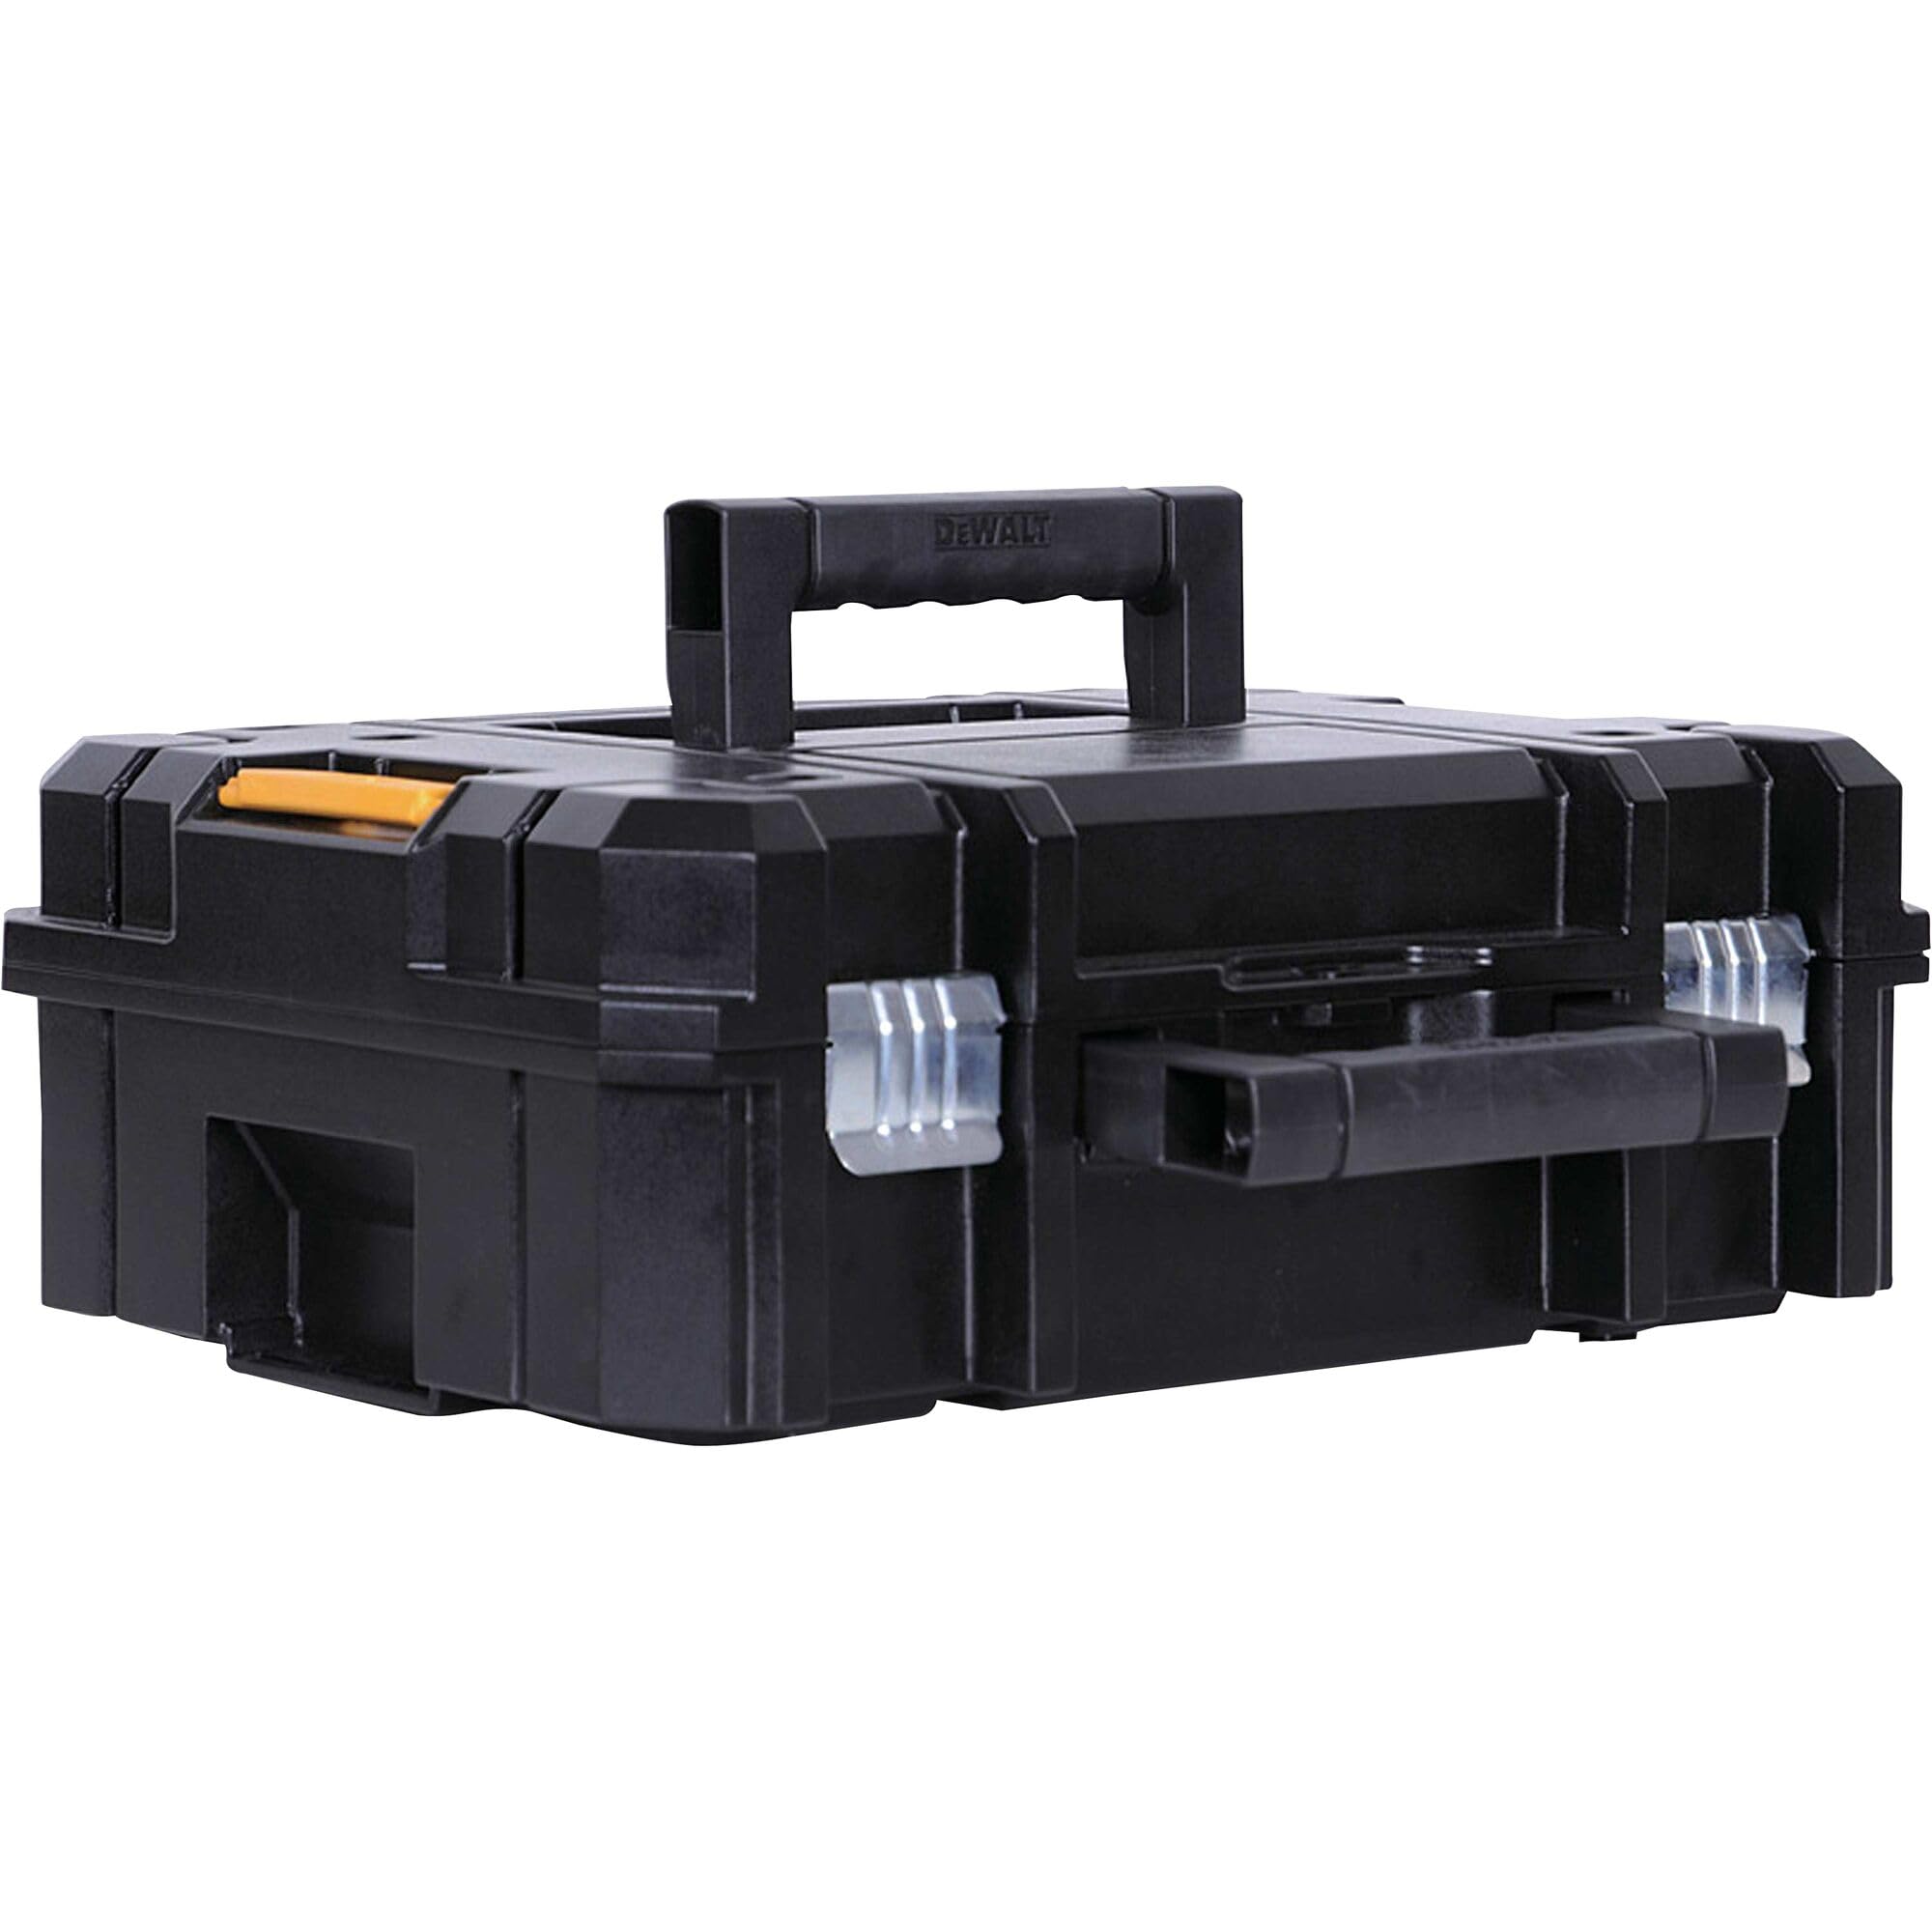 DeWALT 13" T Stak II Portable/Stackable Flat Top Tool Storage Case $12.97 + Free Shipping w/ Prime or on $35+